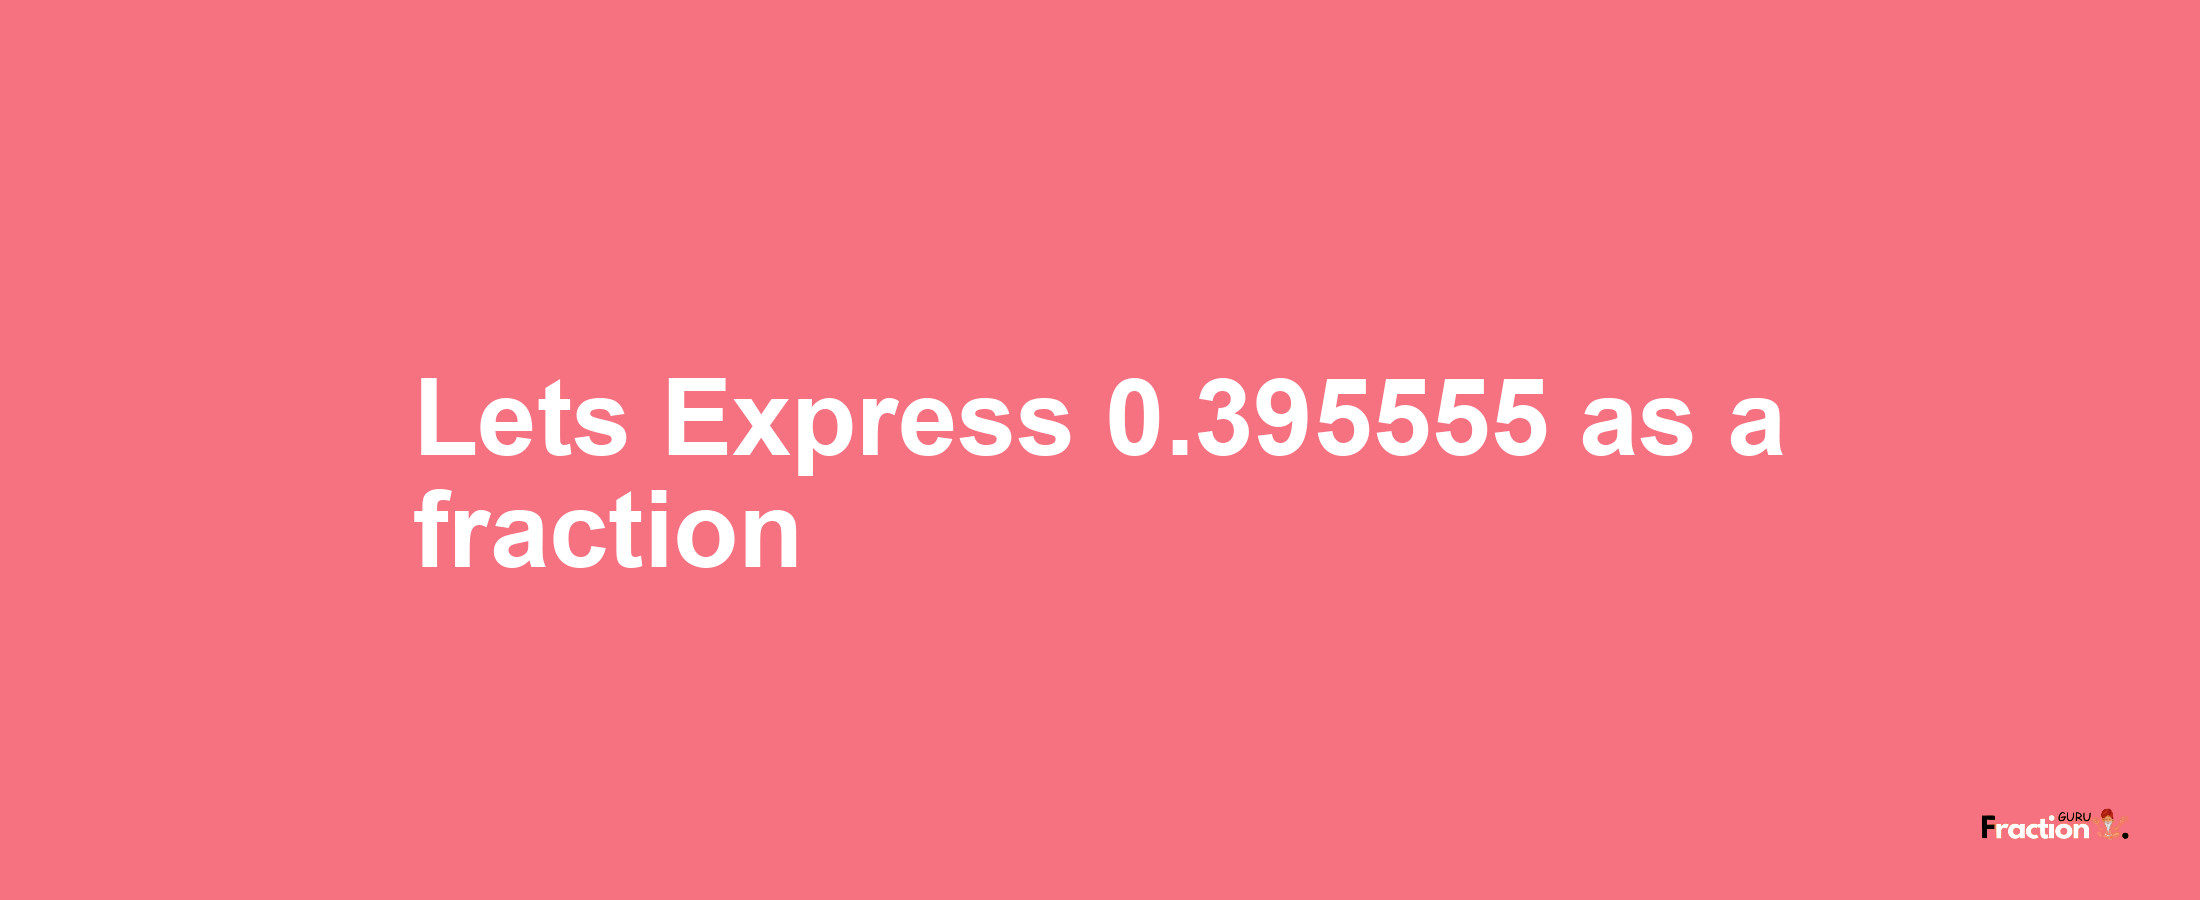 Lets Express 0.395555 as afraction